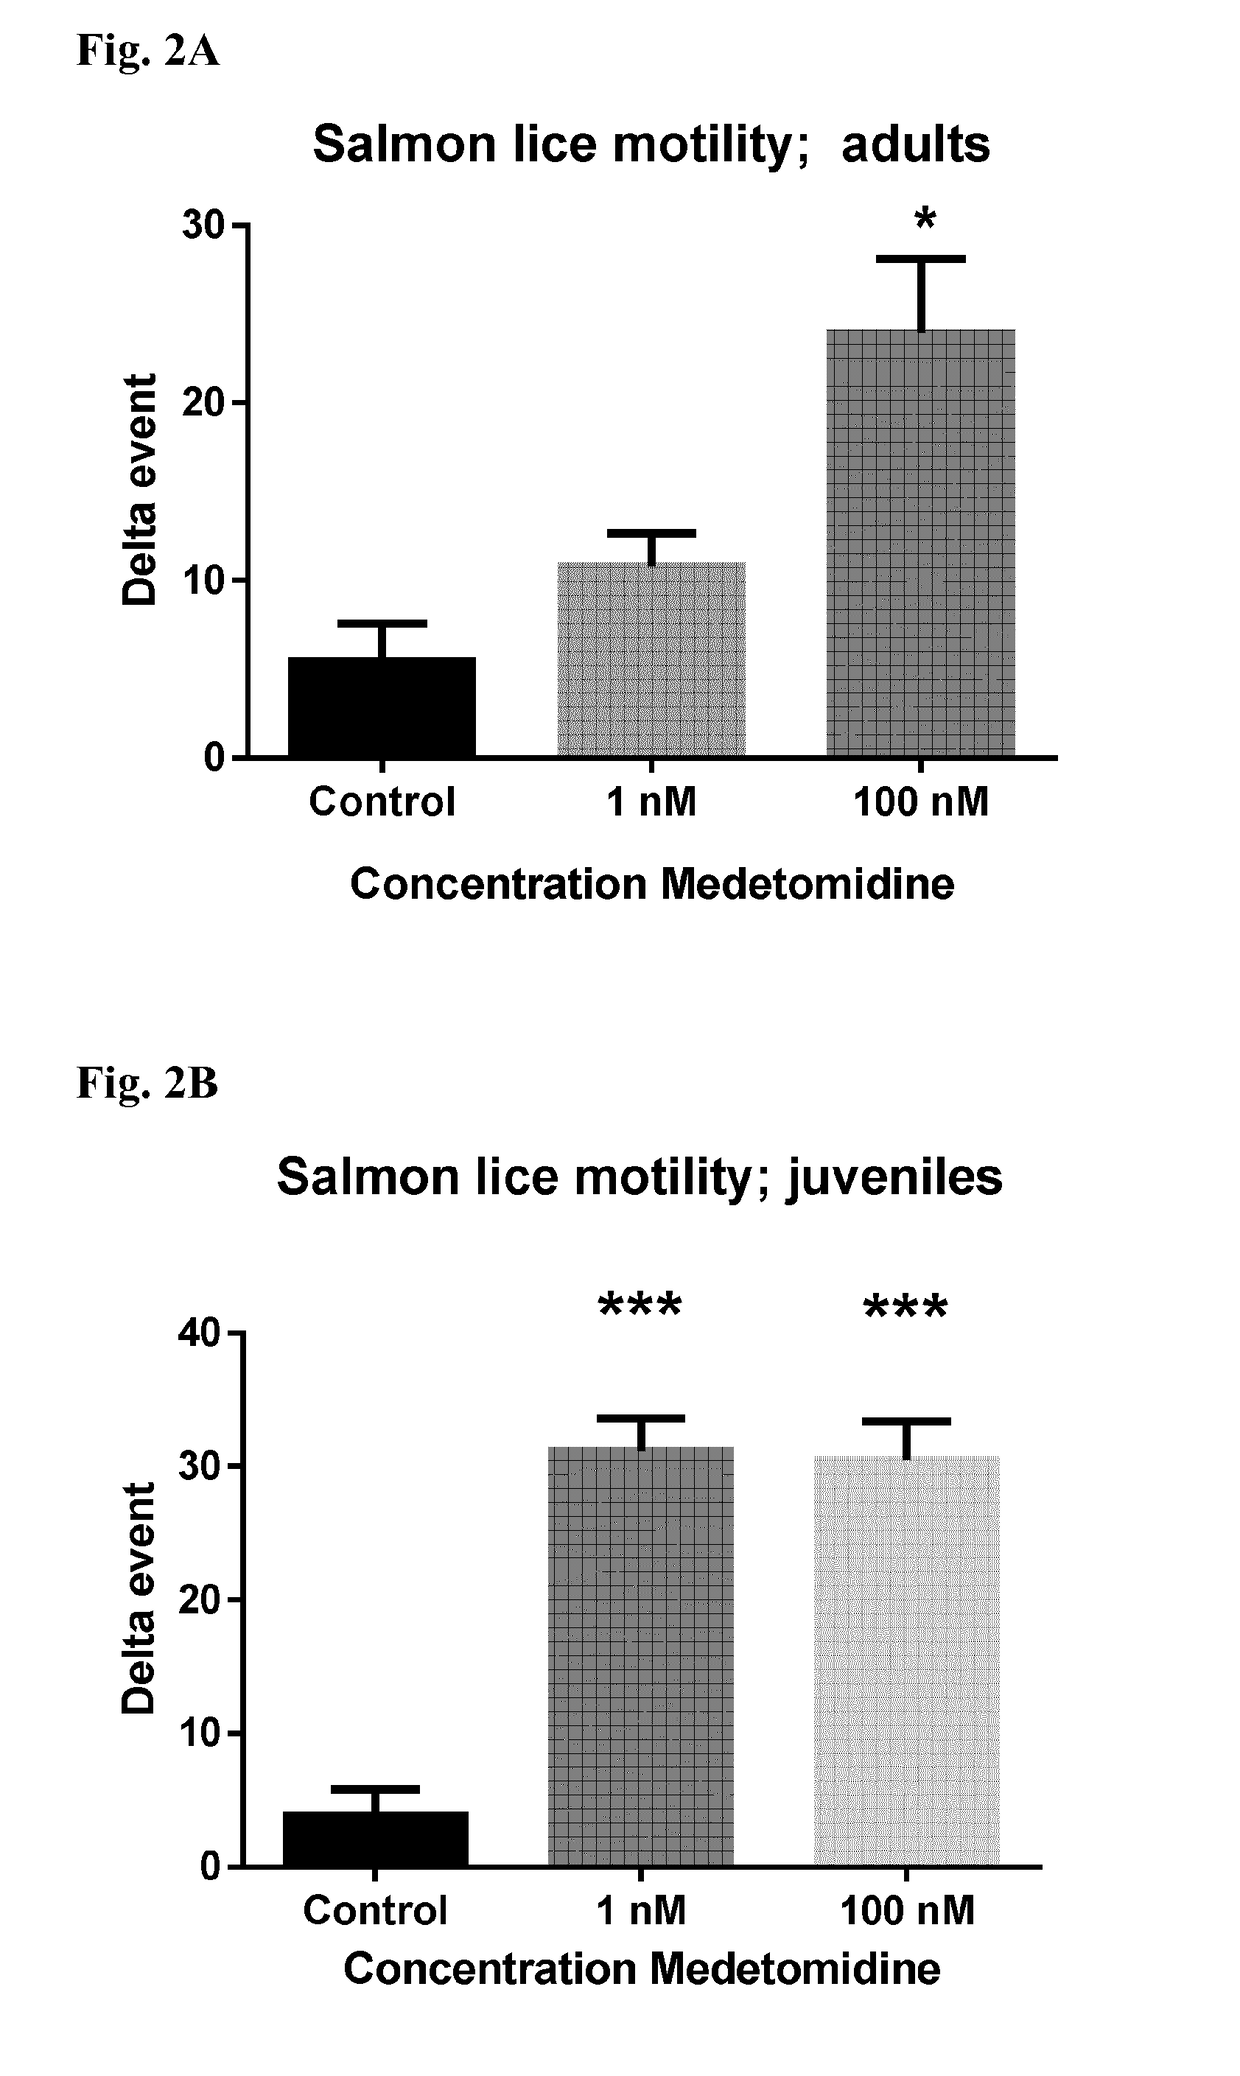 Medetomidine for use in controlling parasitic crustaceans on fish